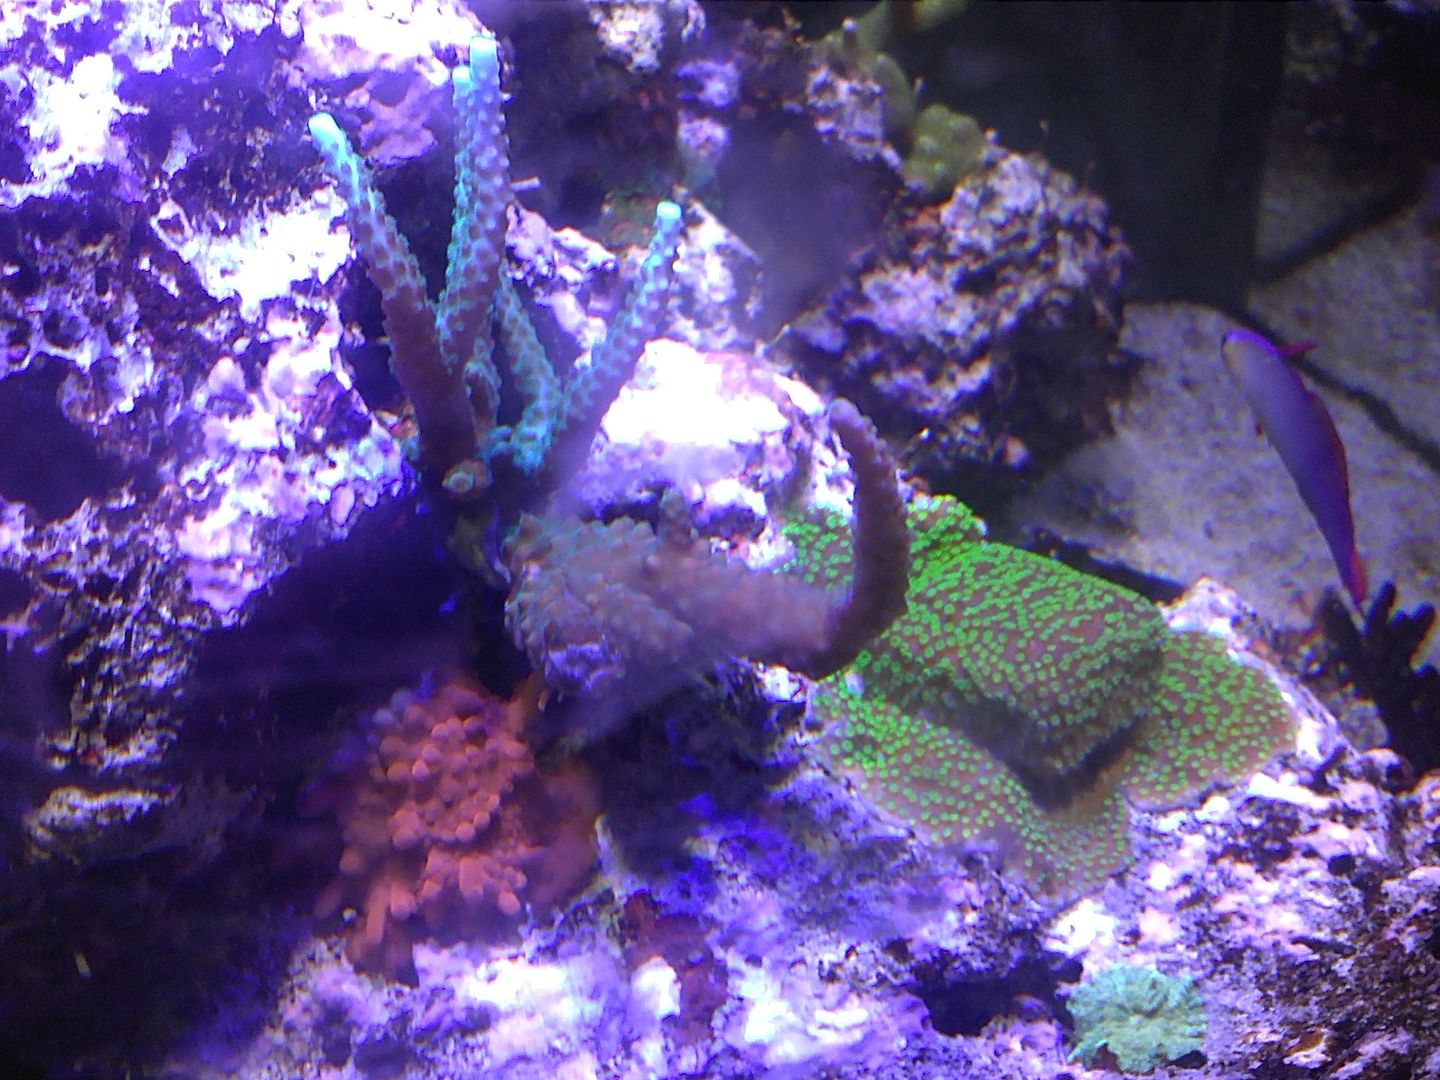 IMG524 zpsd9c32020 - Selling All Corals in 24g $200 as a package